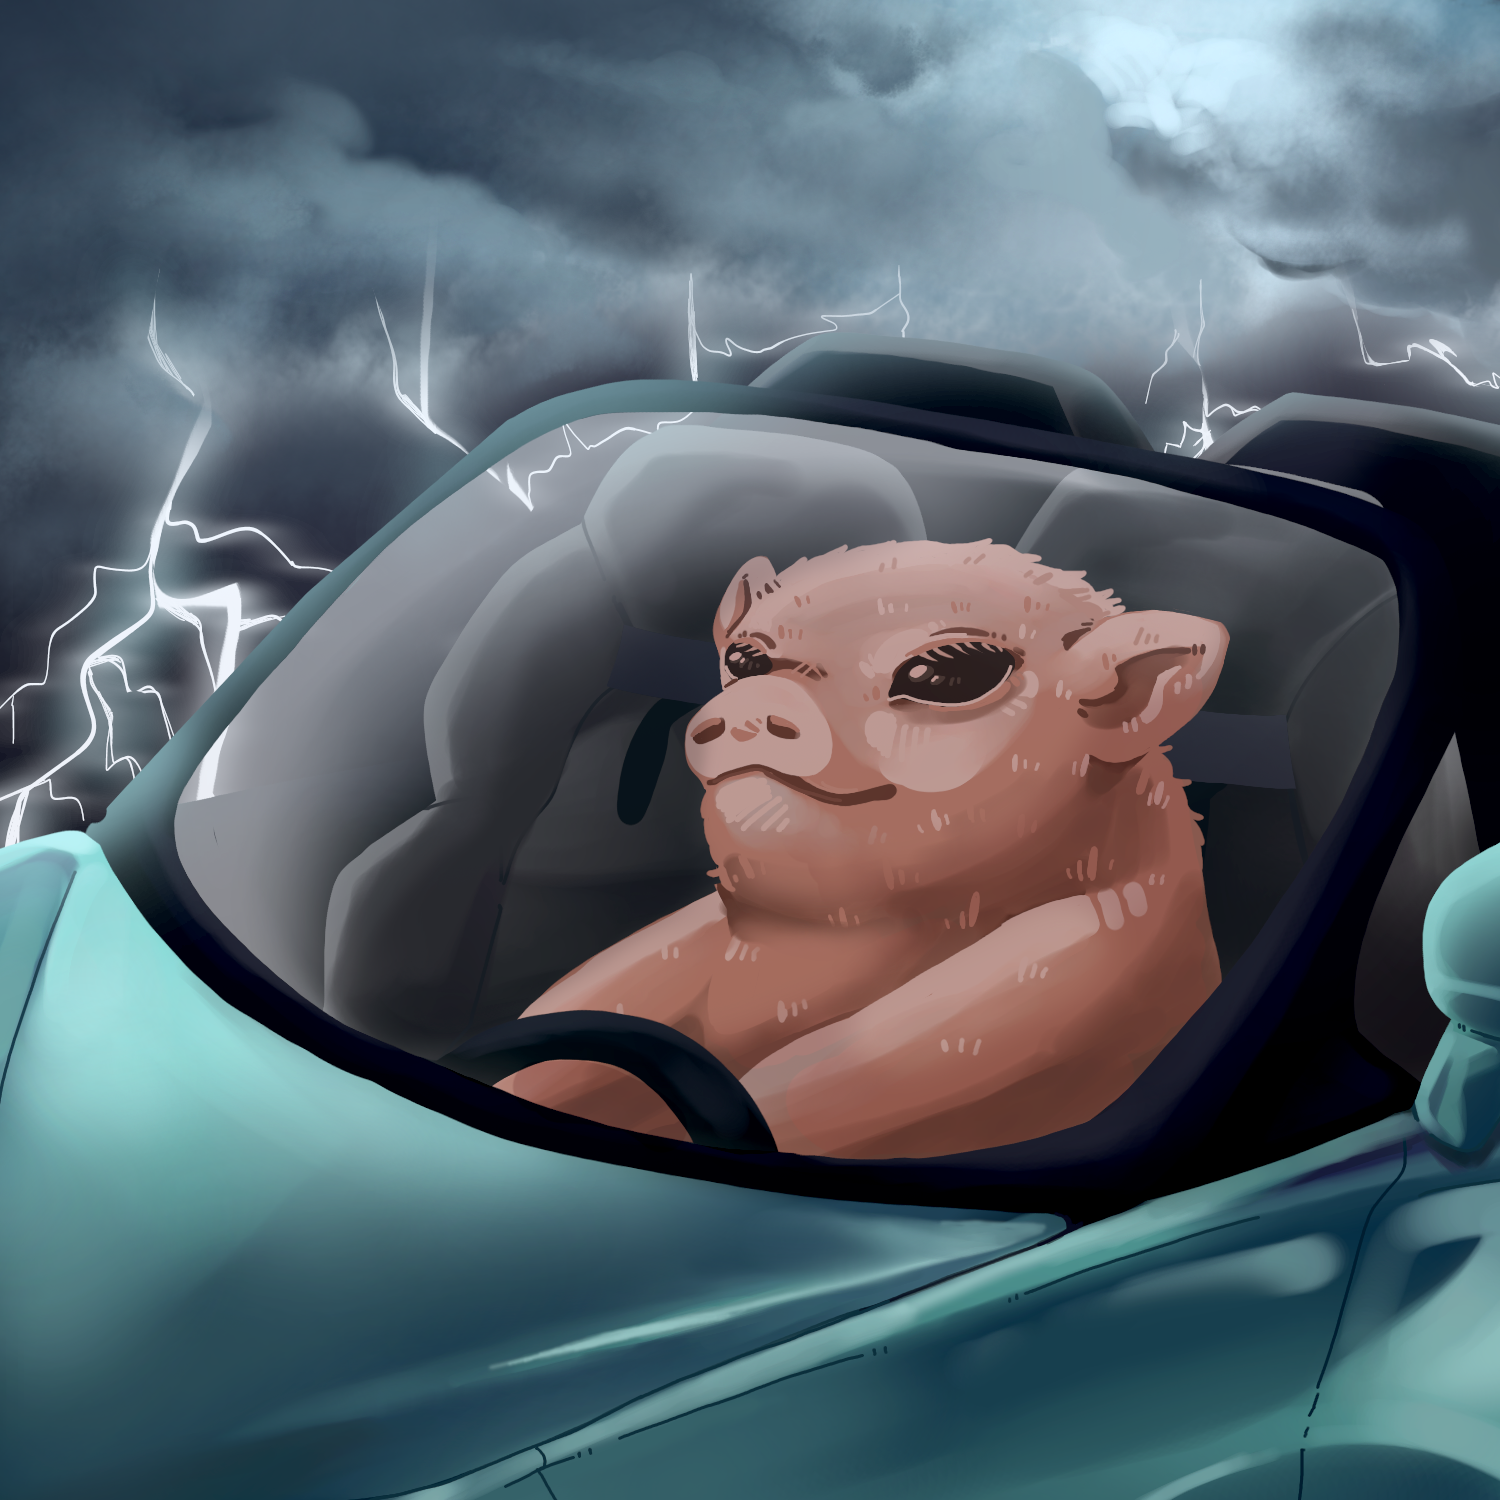 thunderstormpig in a mclaren 570s with a big smile on his cute piggy face